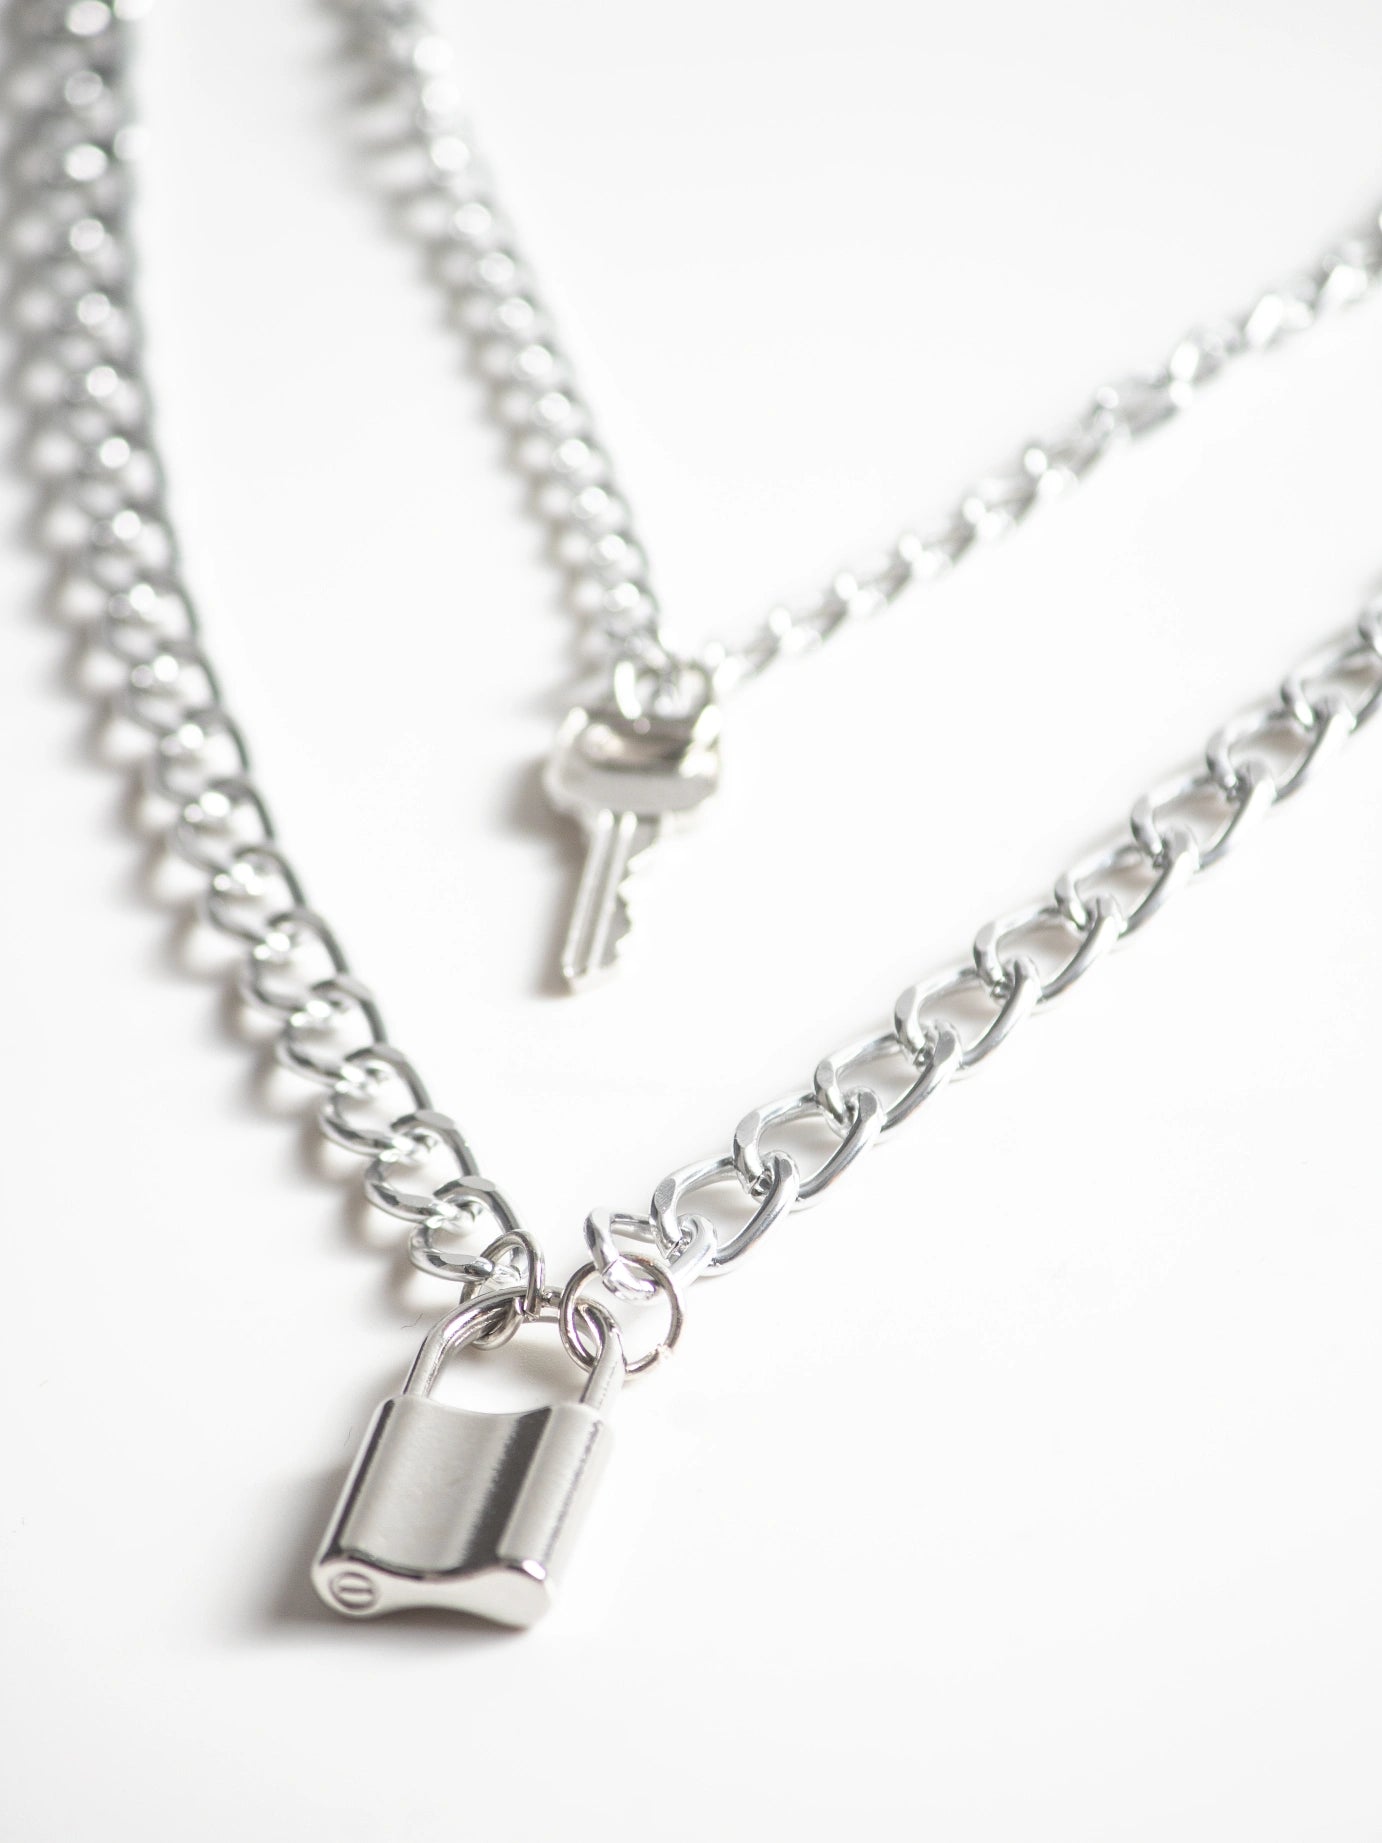 2 Piece Silver Toned Y2k Chains for Men and Women